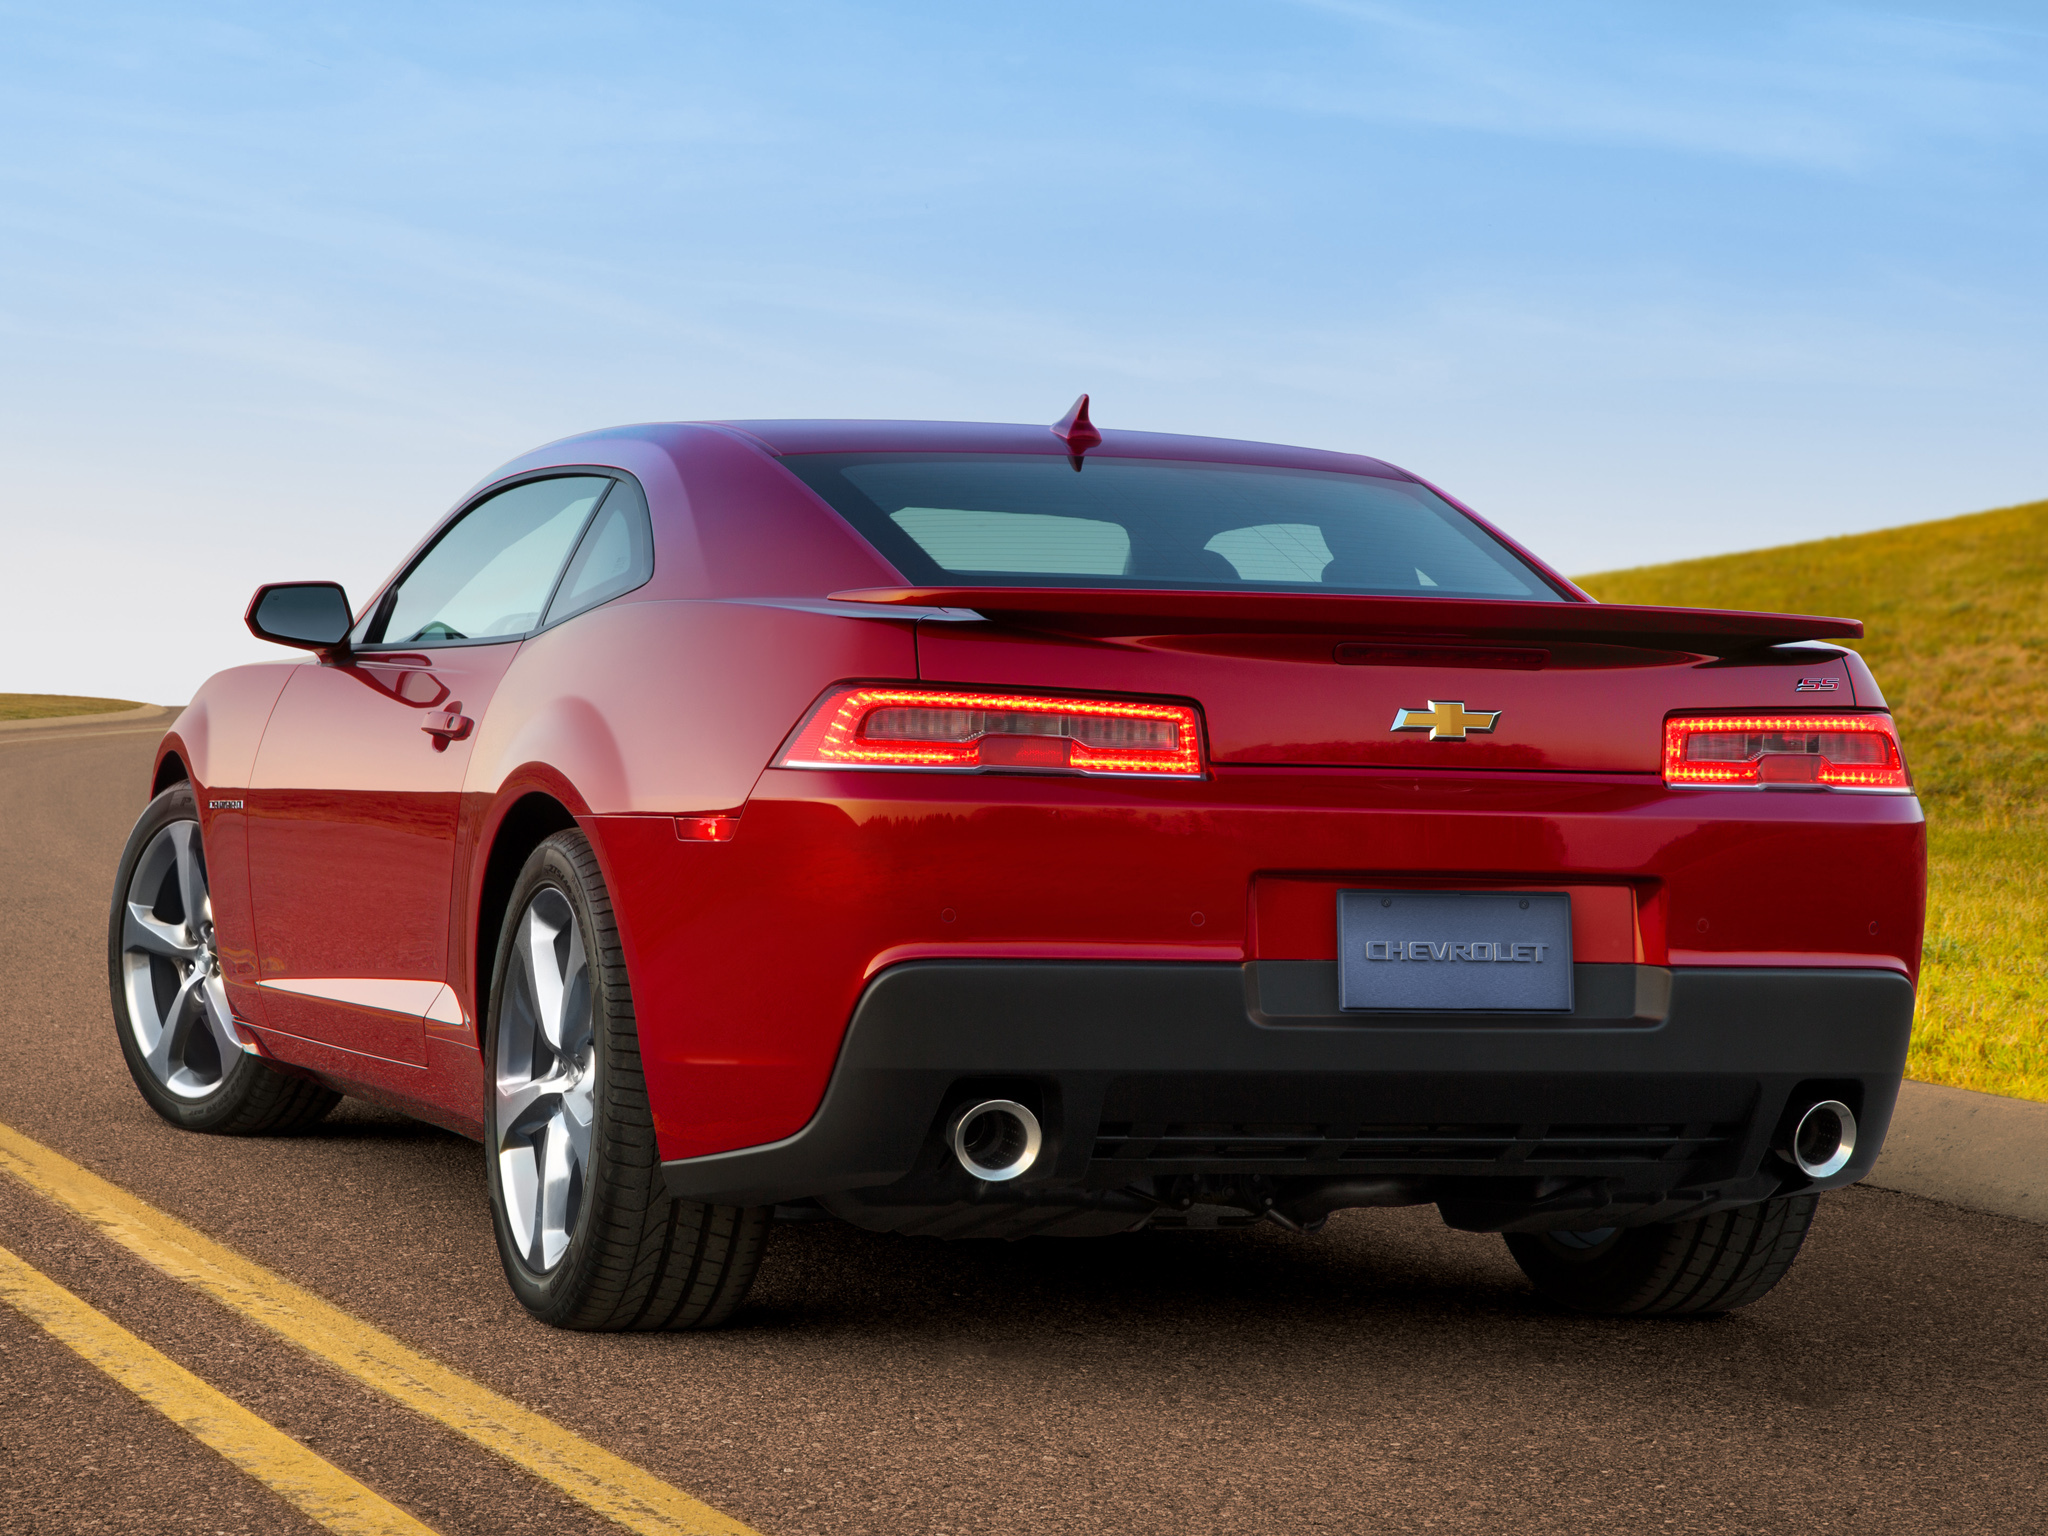 ss, chevrolet, cars, red, back view, rear view, camaro, 2013